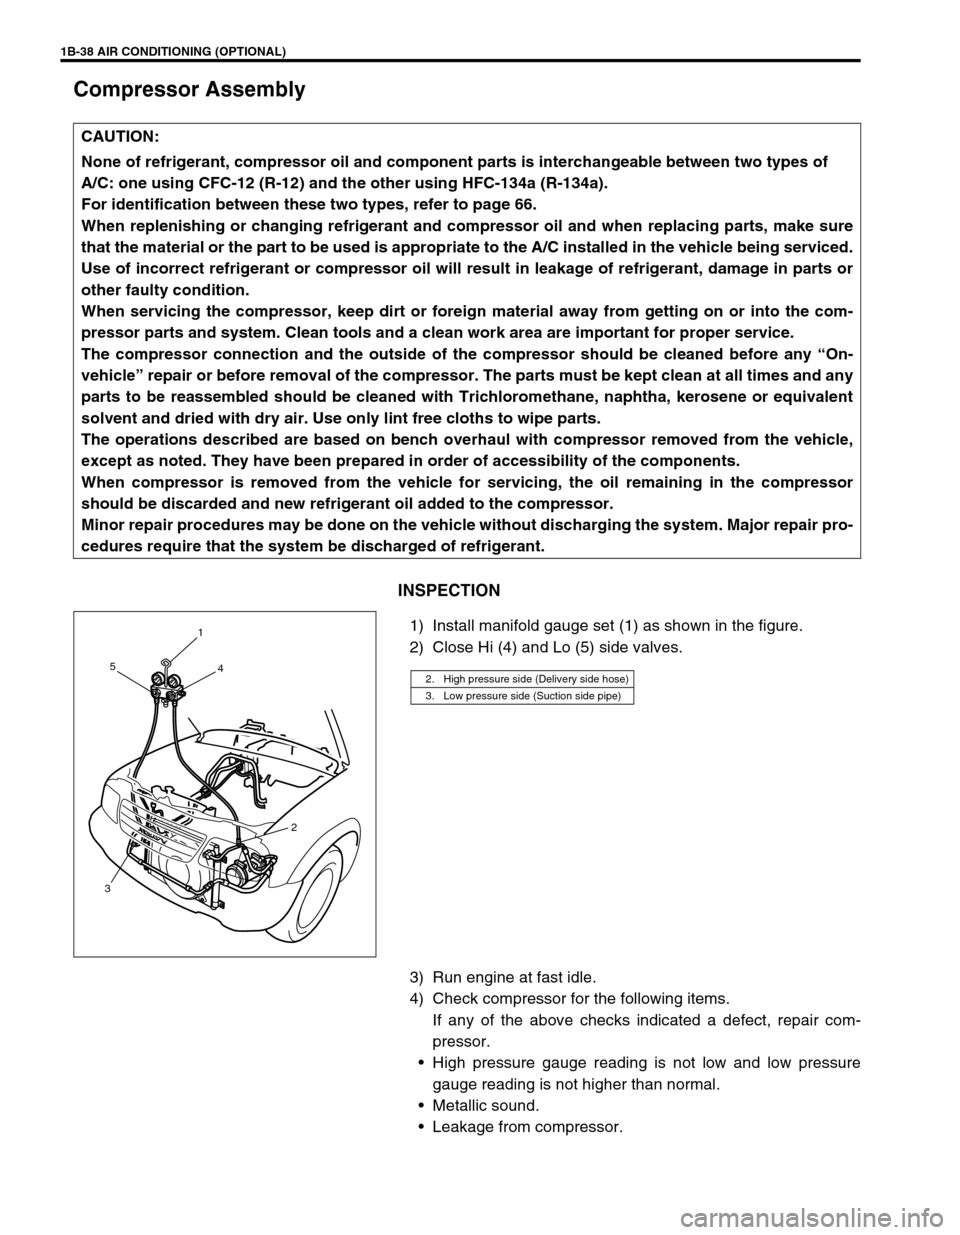 SUZUKI GRAND VITARA 1999 2.G User Guide 1B-38 AIR CONDITIONING (OPTIONAL)
Compressor Assembly
INSPECTION
1) Install manifold gauge set (1) as shown in the figure.
2) Close Hi (4) and Lo (5) side valves.
3) Run engine at fast idle.
4) Check 